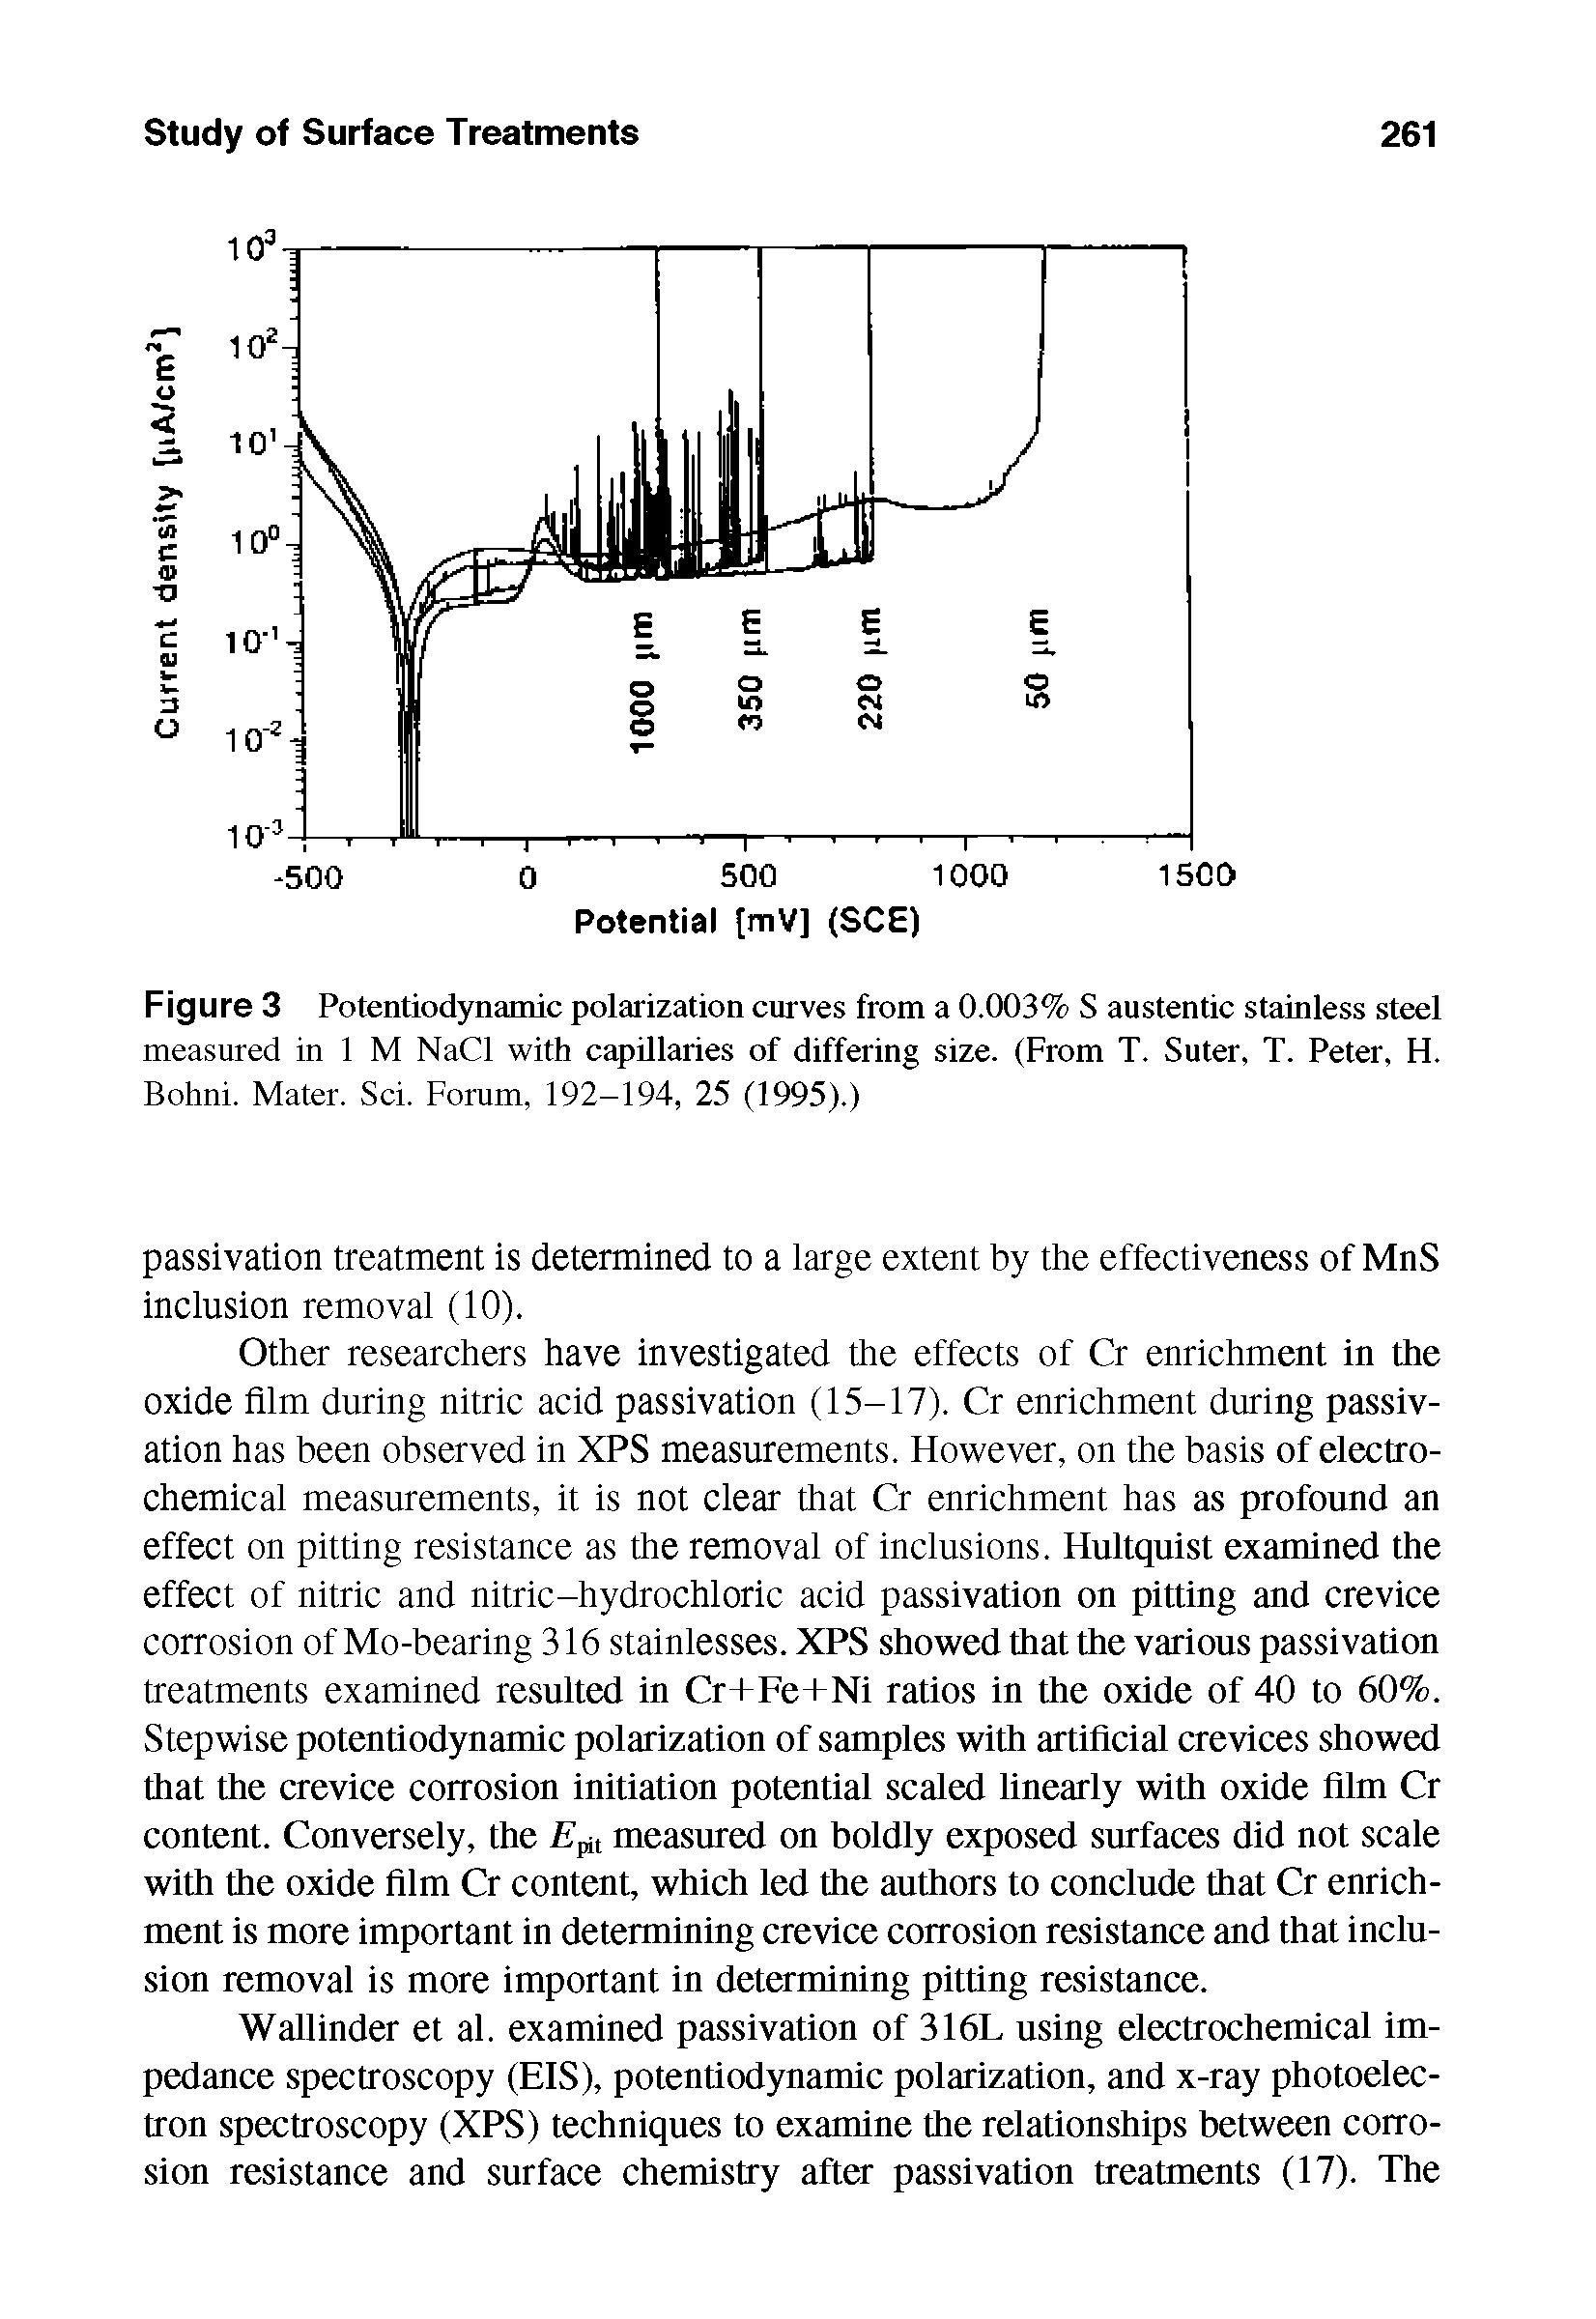 Figure 3 Potentiodynamic polarization curves from a 0.003% S austentic stainless steel measured in 1 M NaCl with capillaries of differing size. (From T. Suter, T. Peter, H. Bohni. Mater. Sci. Forum, 192-194, 25 (1995).)...